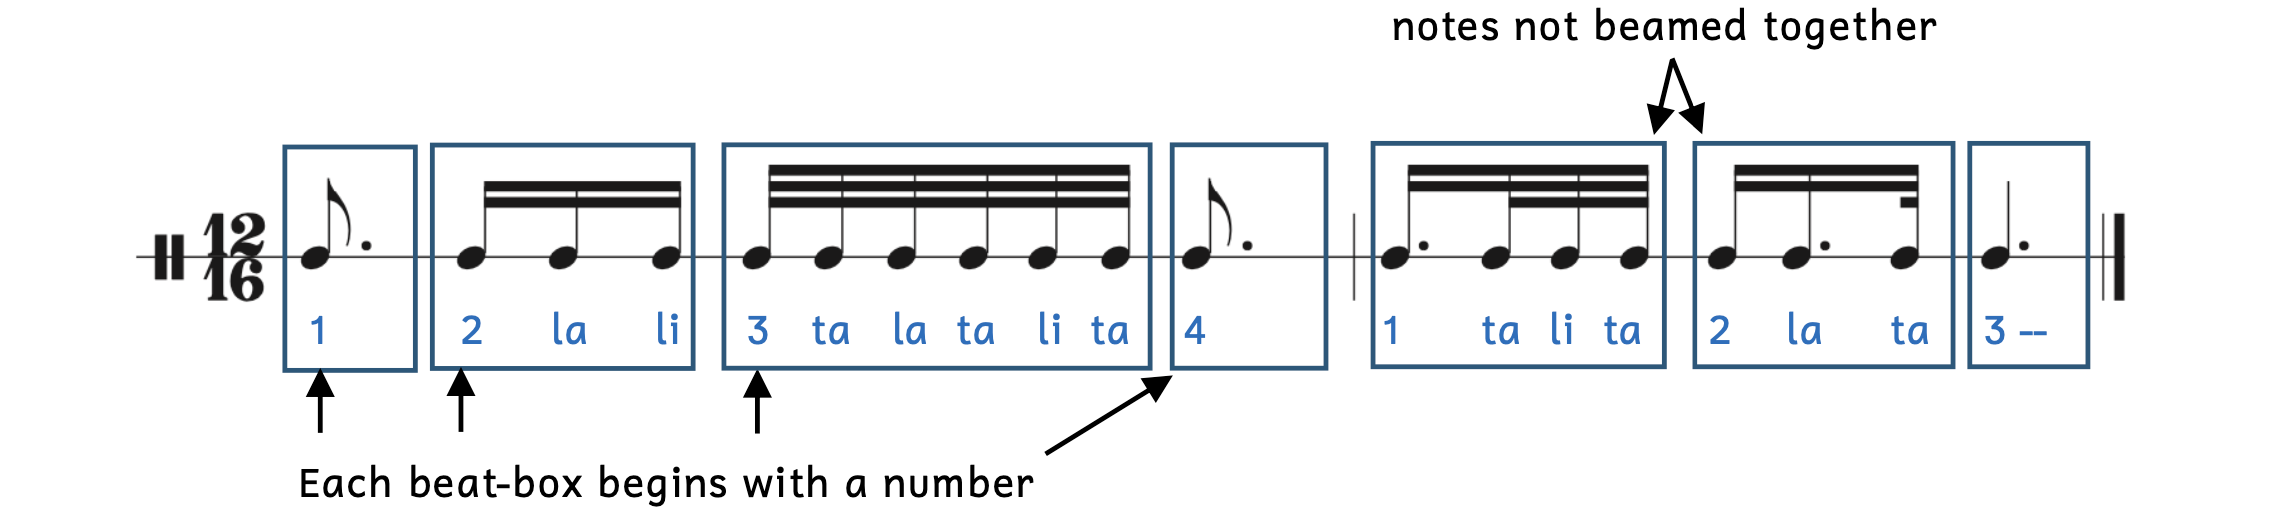 Beat-boxes to help identify beats. Each beat-box begins with a number. Notes are not beamed together across beat boxes. Listen to the sound clip below.